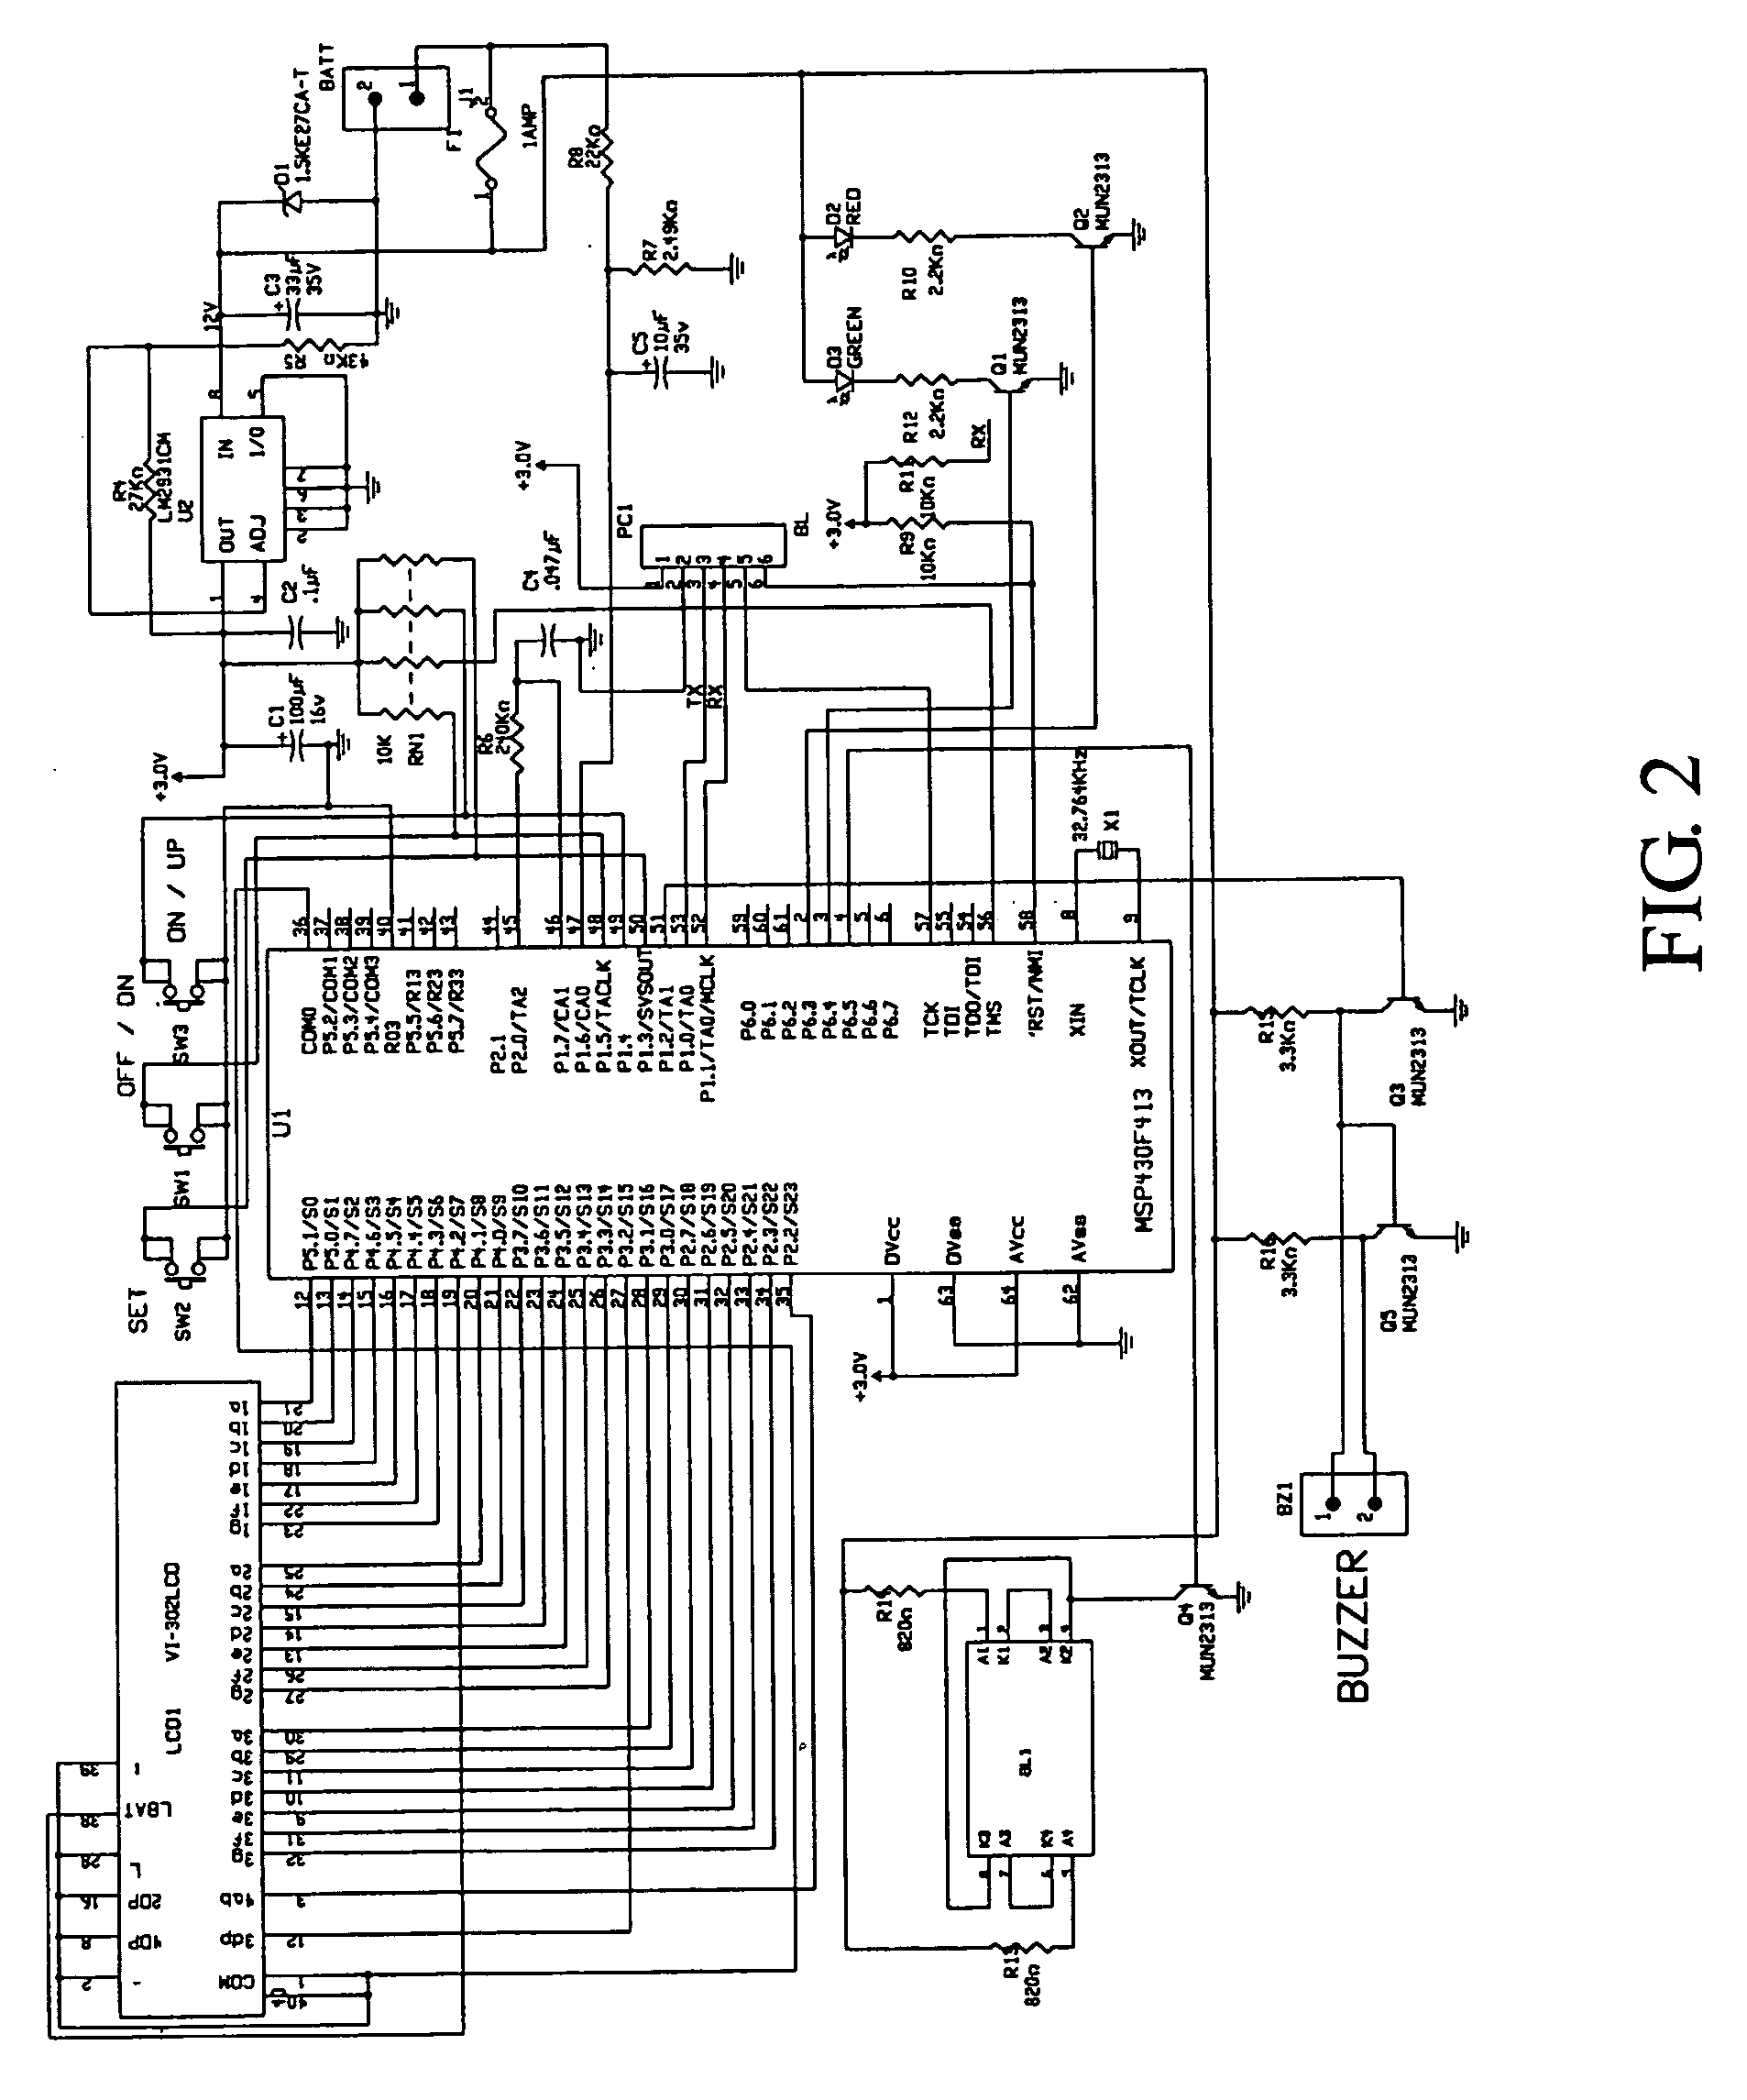 Battery voltage monitor